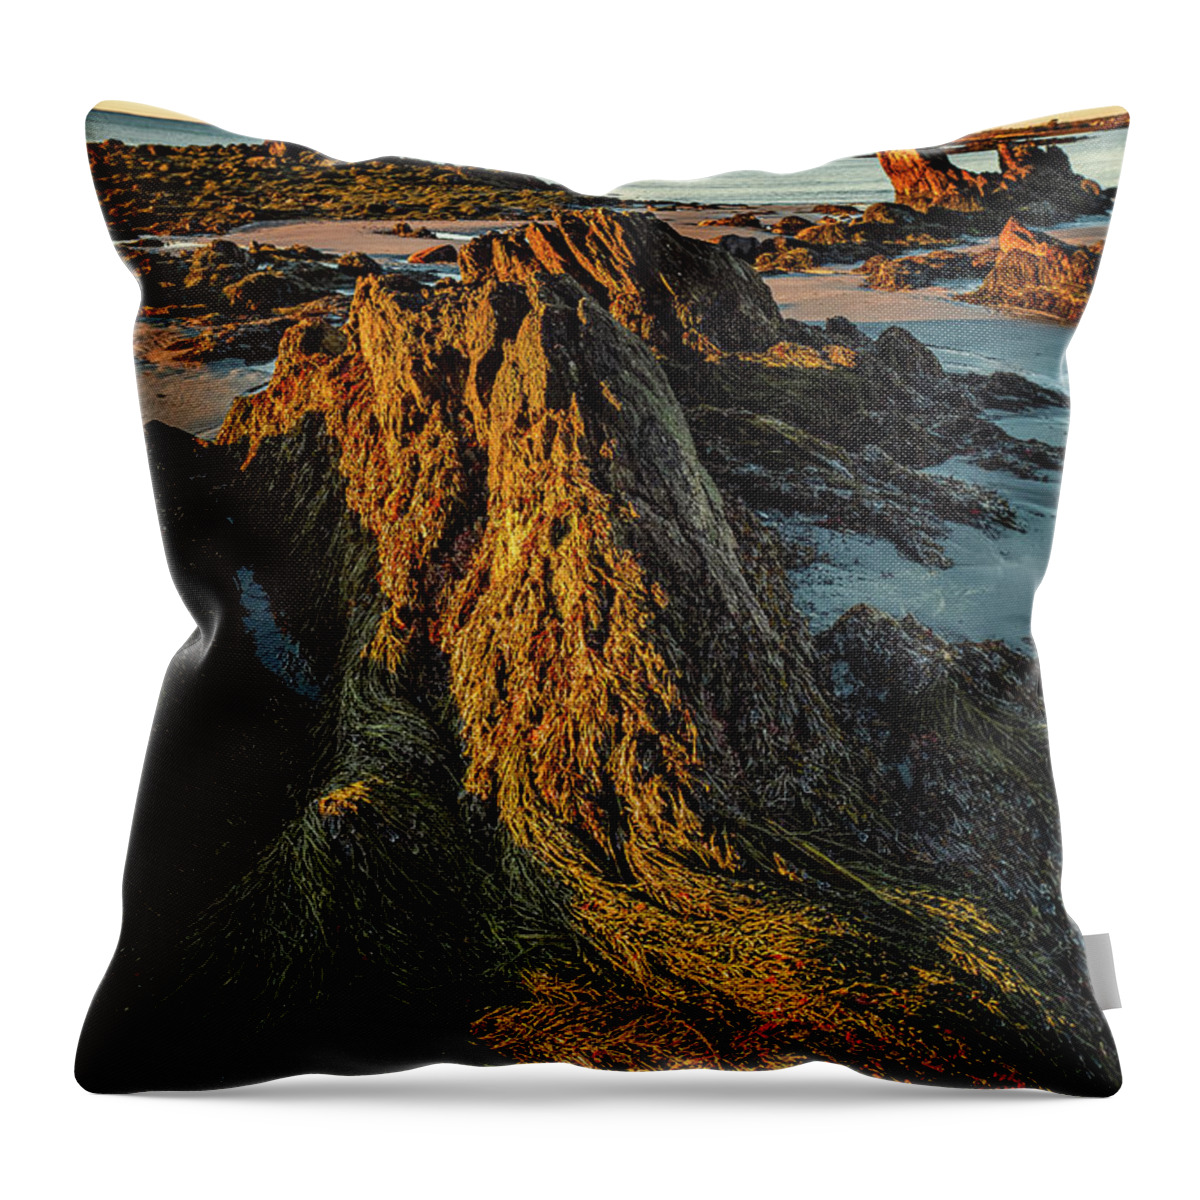 New Hampshire Throw Pillow featuring the photograph Seaweed Over Rocks At Low Tide, Fort Foster. by Jeff Sinon